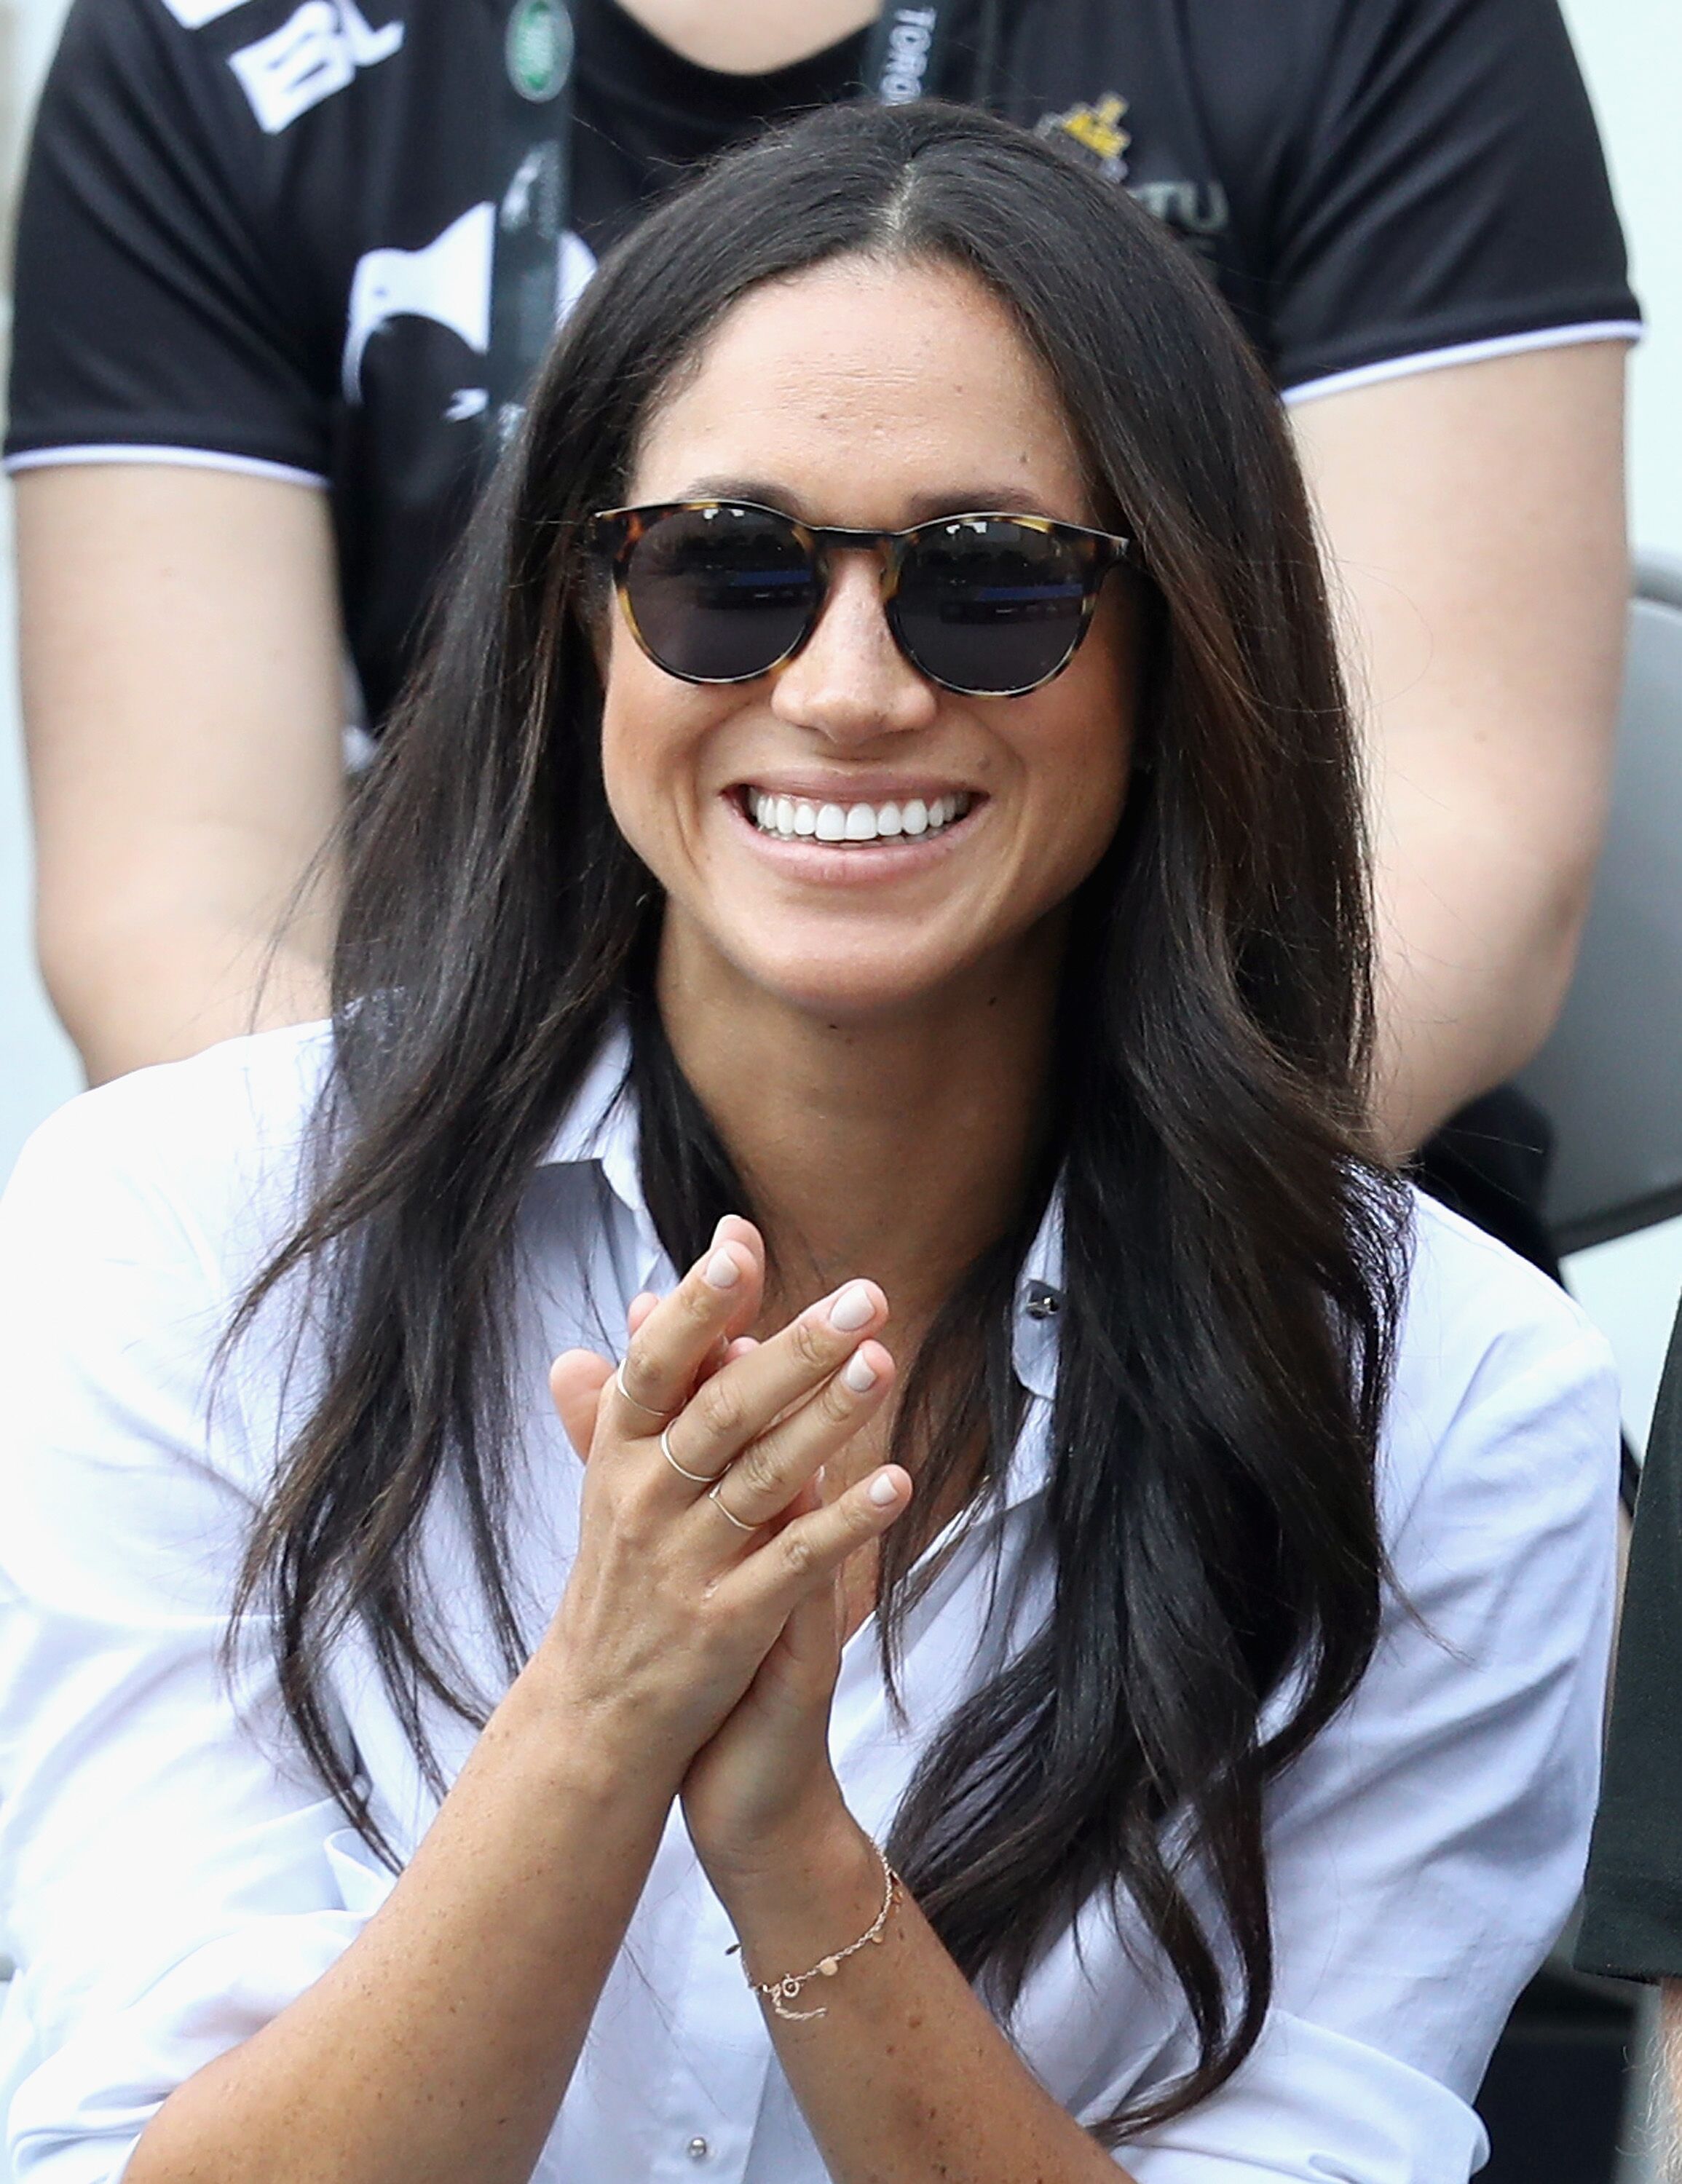 Meghan Markle attends a Wheelchair Tennis match during the Invictus Games 2017 at Nathan Philips Square in Toronto, Canada | Photo: Getty Images